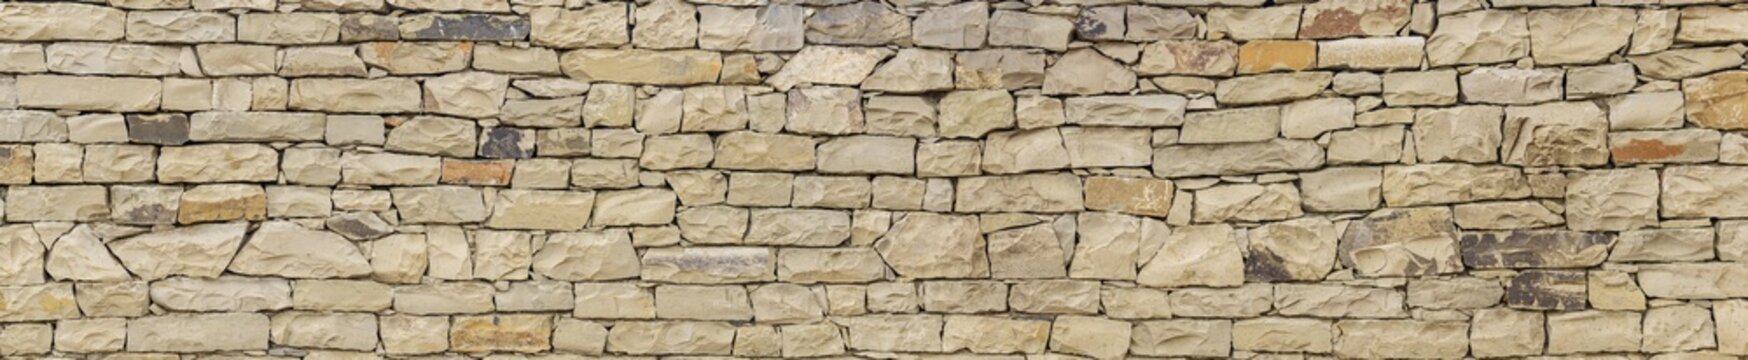 horizontal background, texture - wall of roughly hewn natural light stone